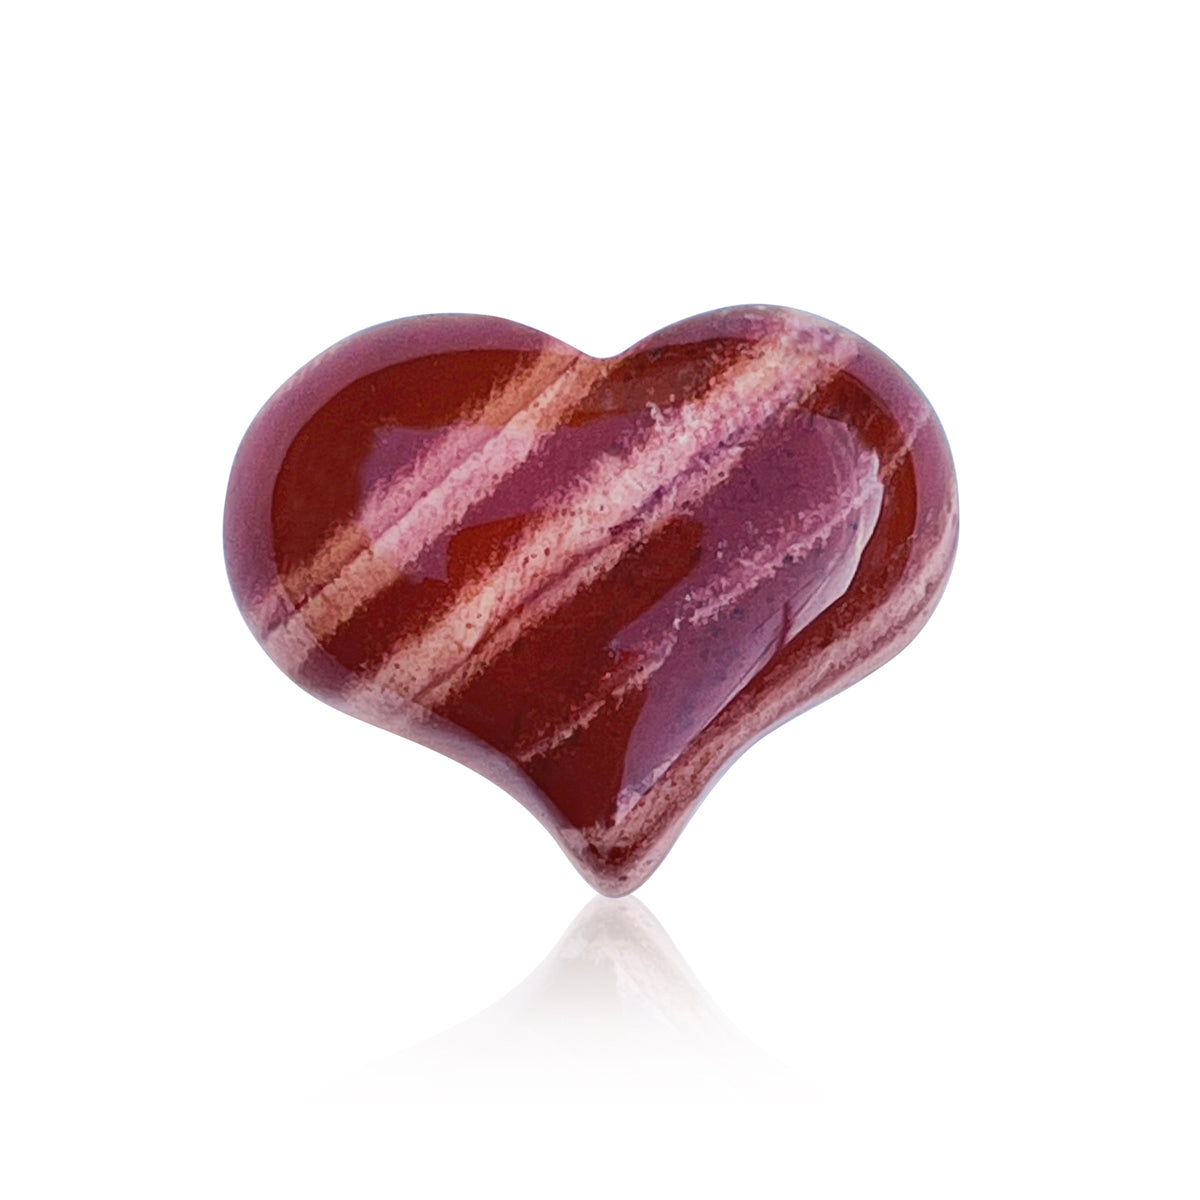 Brecciated Jasper Heart Shaped Healing Gemstone for Support. Brecciated Jasper is very supportive during times of stress. It assists when we are feeling overwhelmed, helping to remain calm, focused.